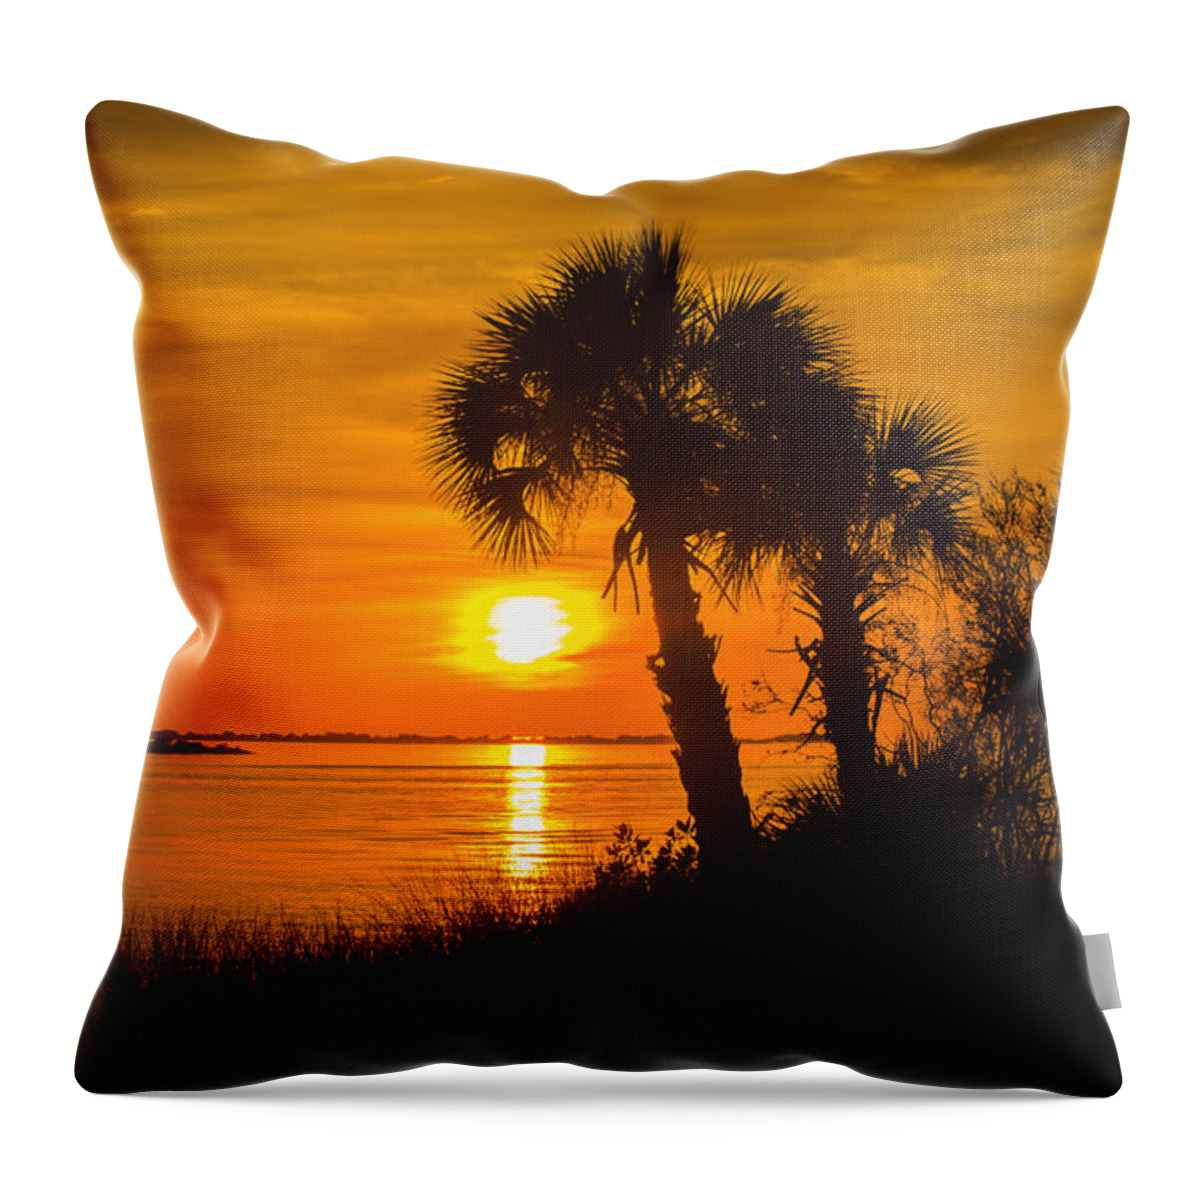 Bayport Park Throw Pillow featuring the photograph Settting Sun by Marvin Spates